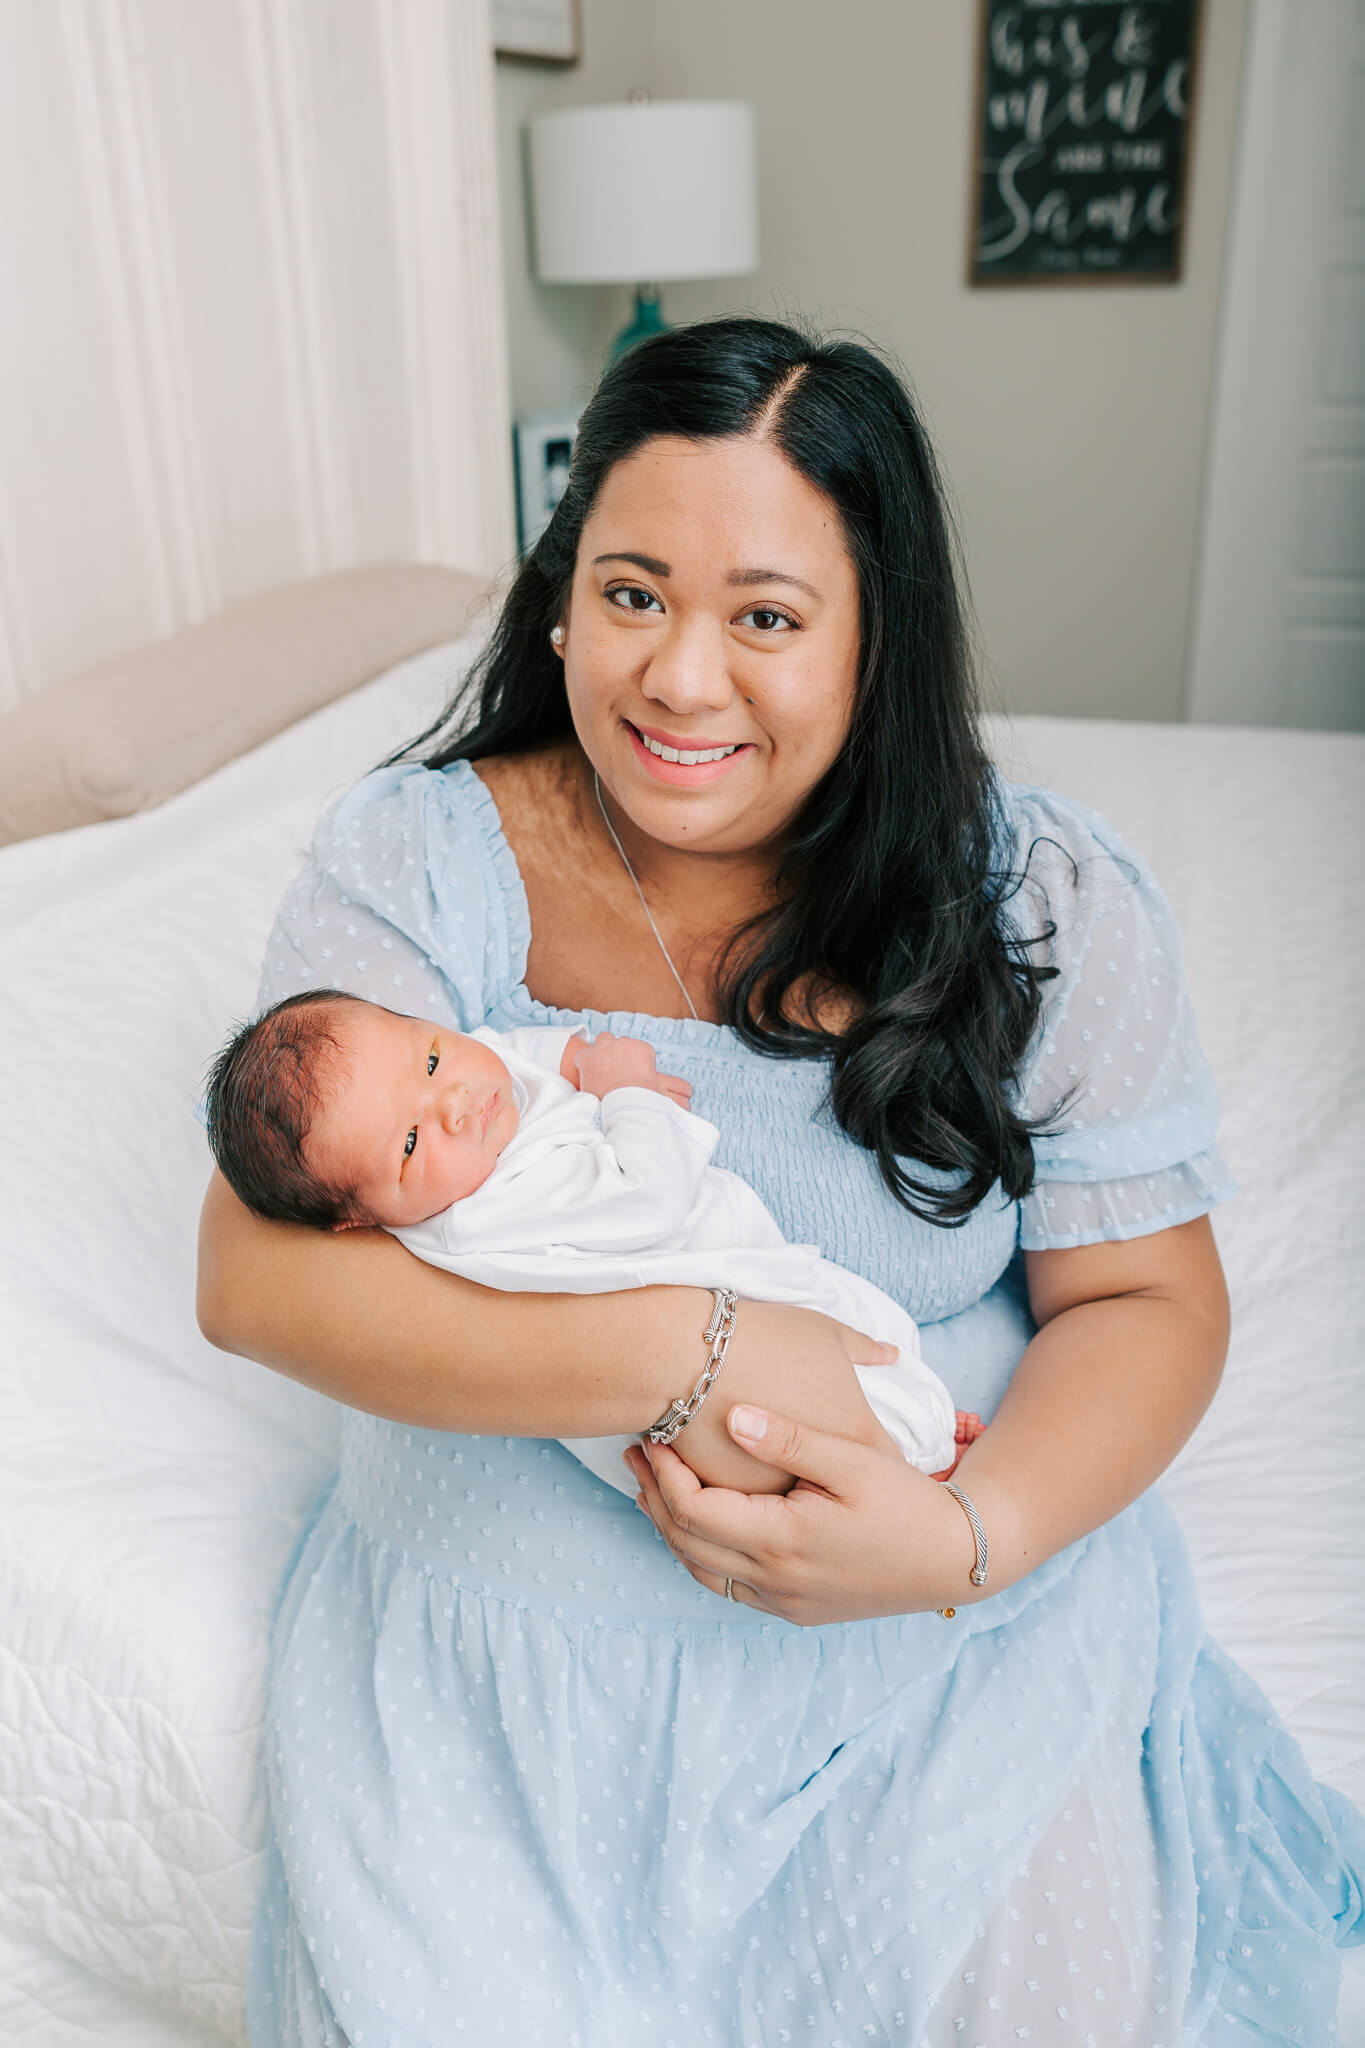 Mom and sweet baby sharing a precious moment during their newborn session. Mom shops at Duck Duck Goose Columbia SC